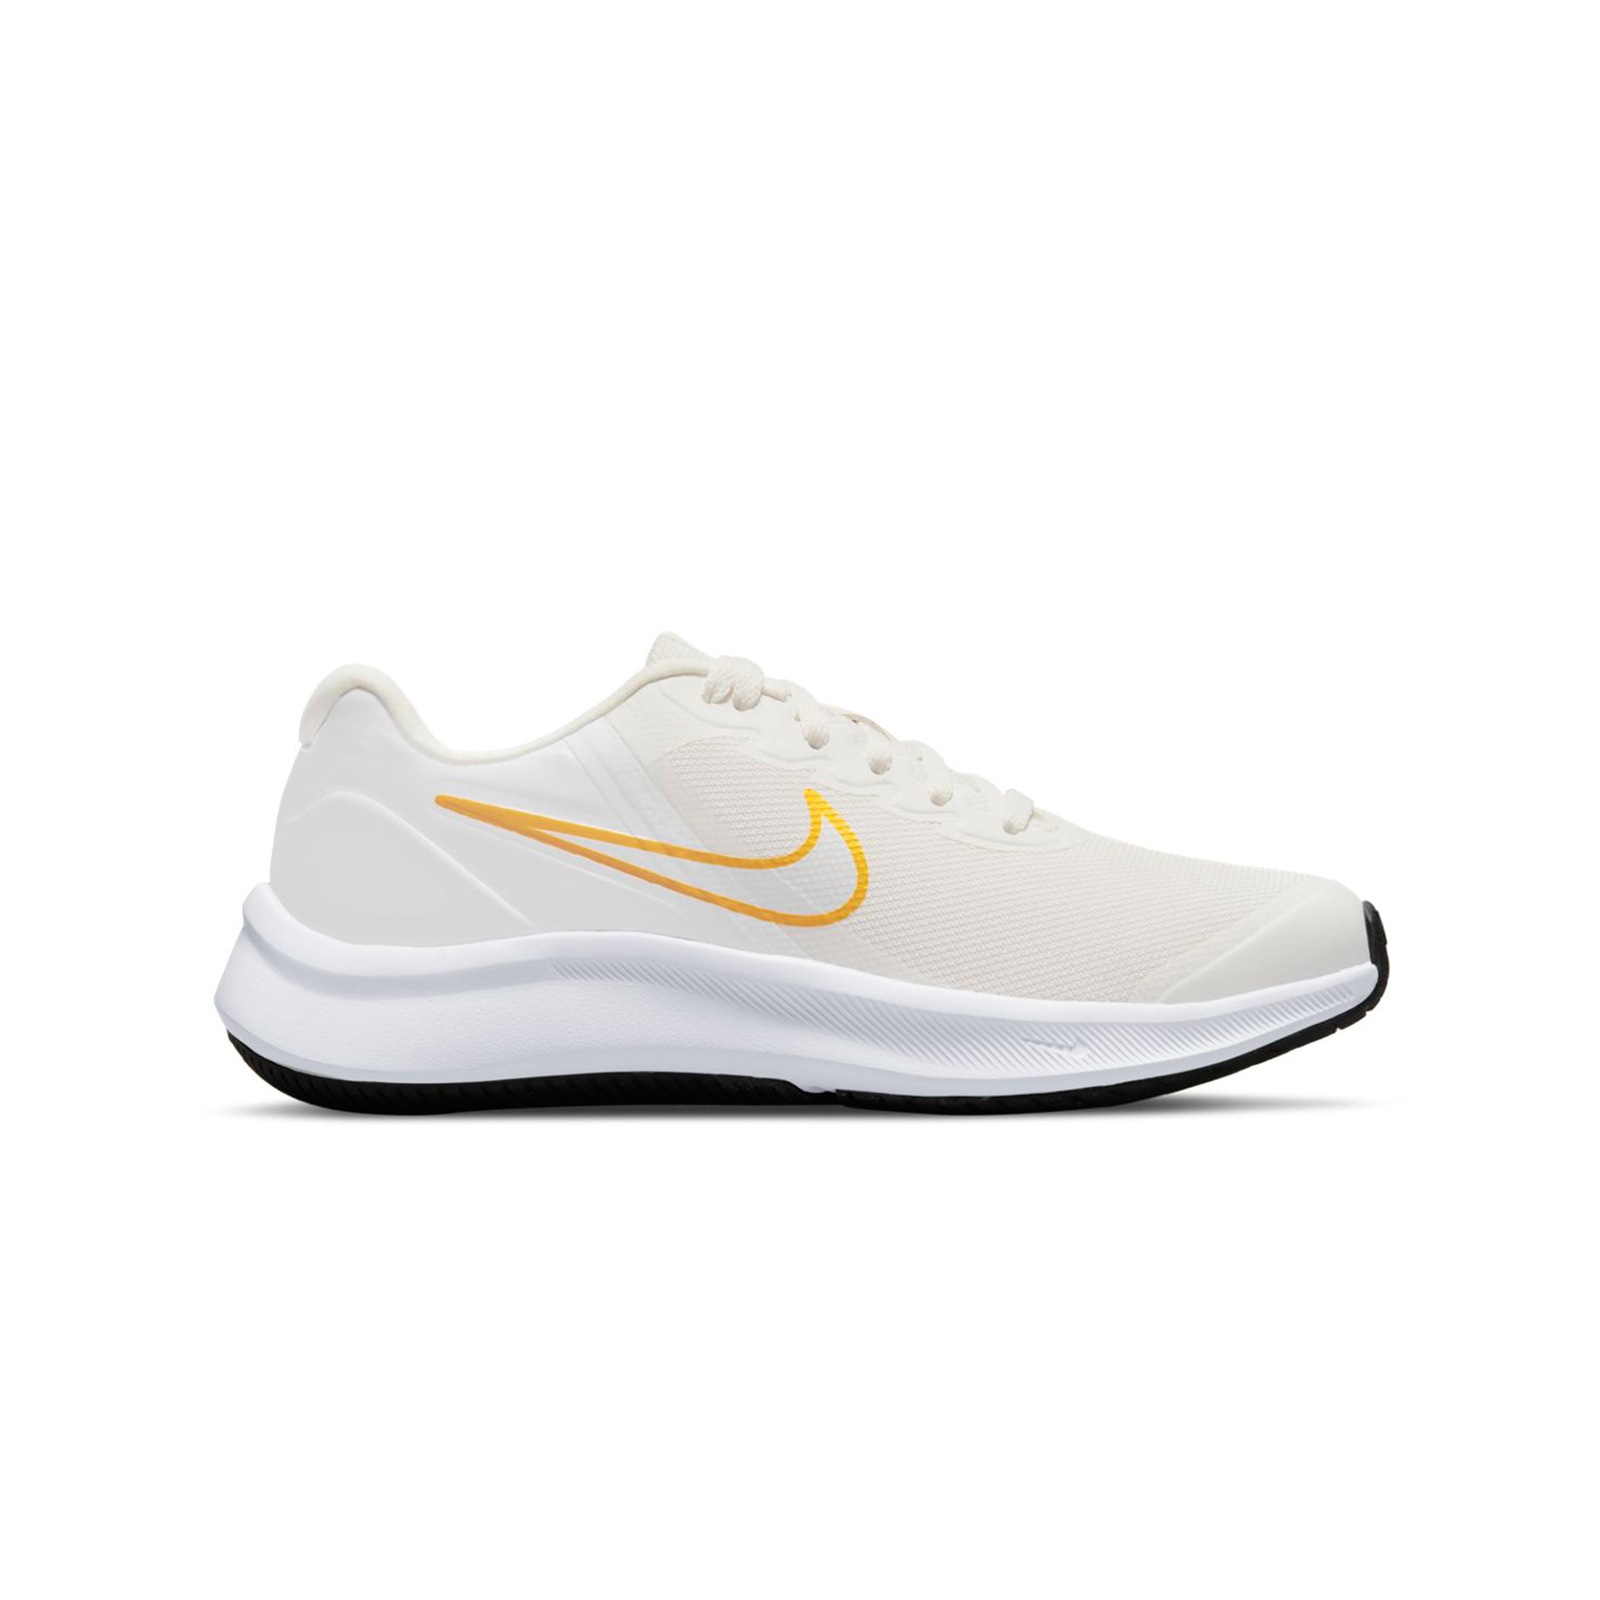 Nike - NIKE STAR RUNNER 3 (GS) - MULTI-COLOR Παιδικά > Παπούτσια > Αθλητικά > Παπούτσι Low Cut